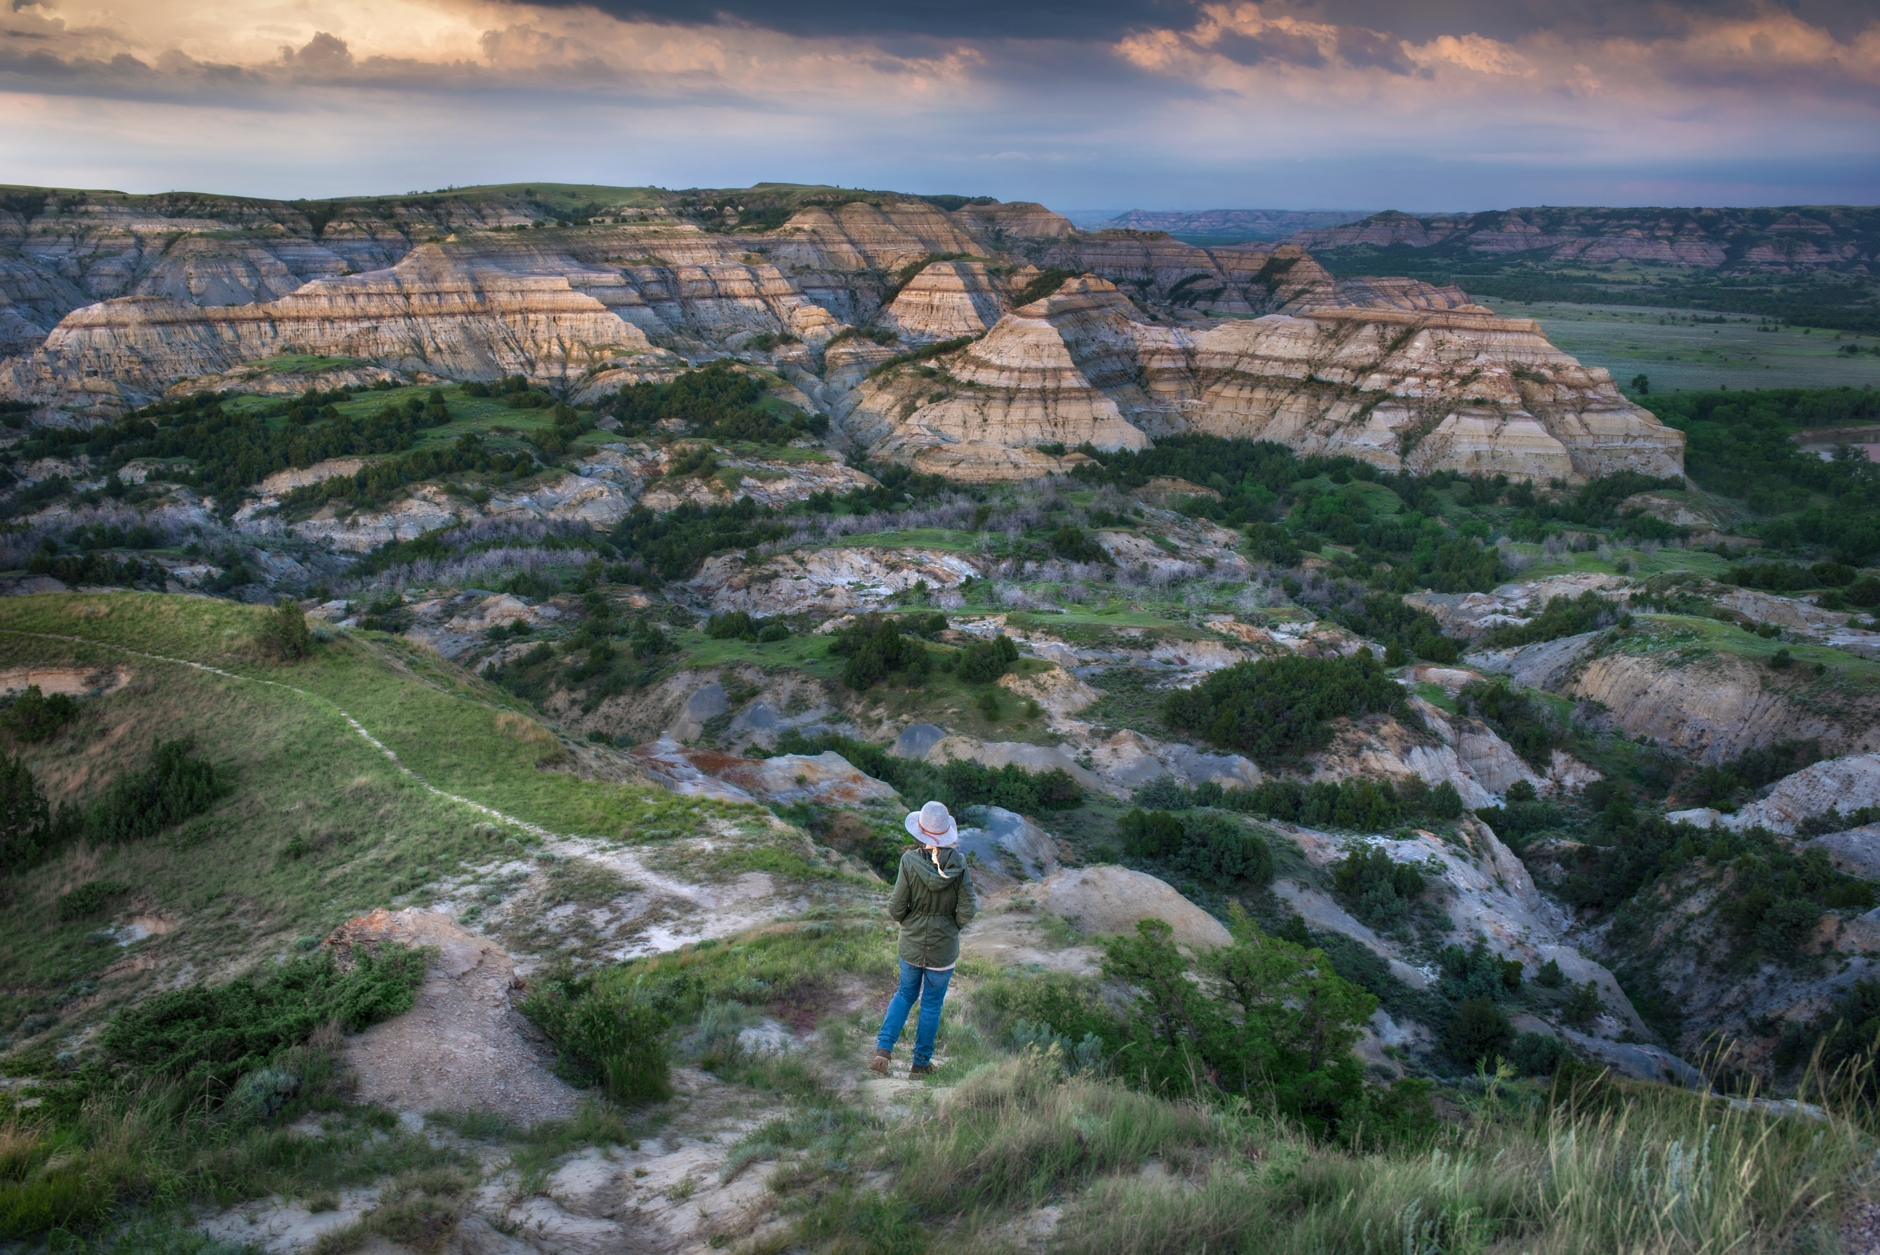 Theodore Roosevelt National Park Wallpapers